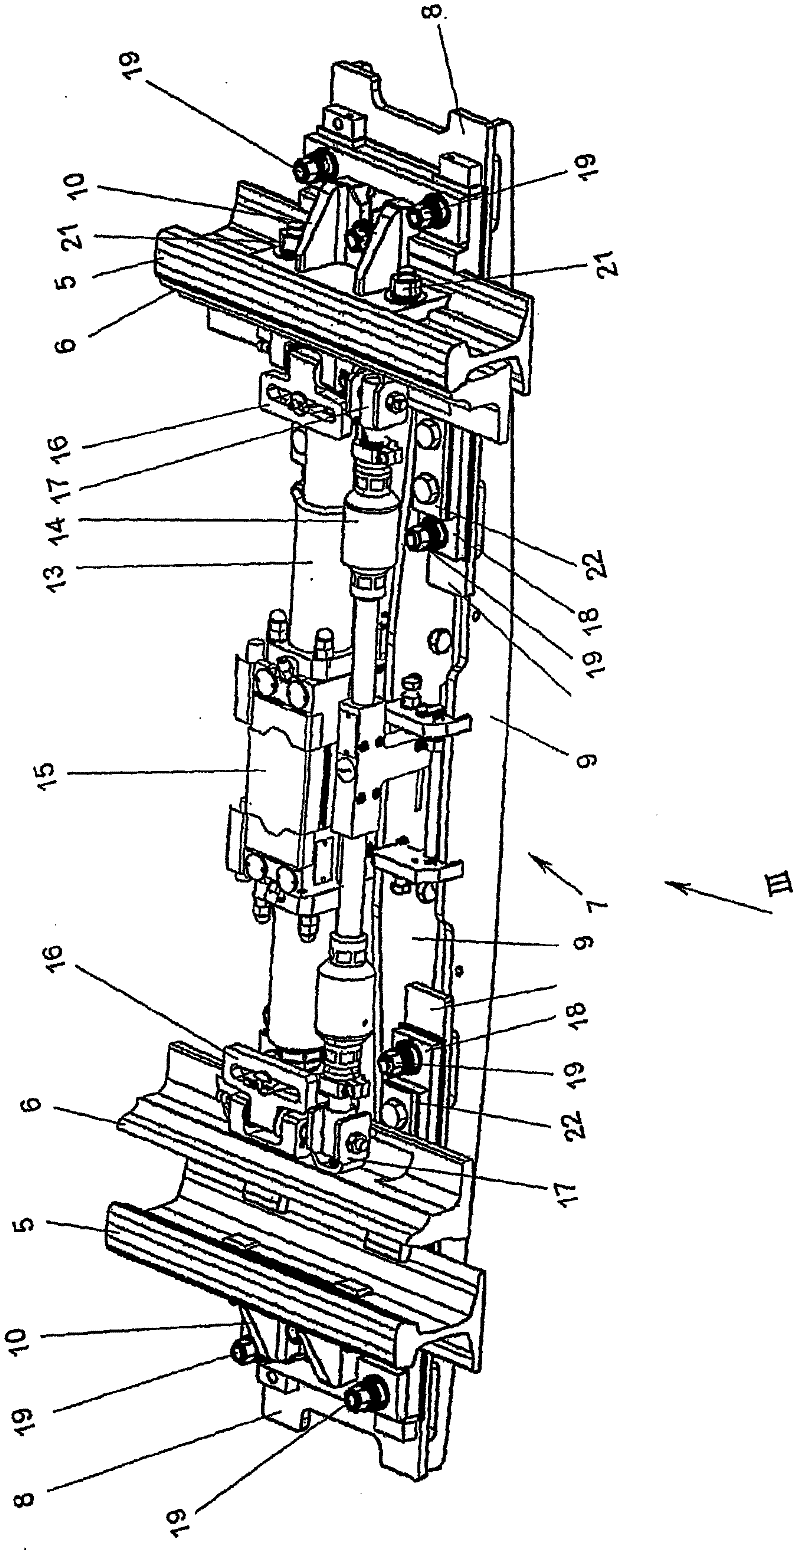 Apparatus for fixing a switching device on stock rails of a switch